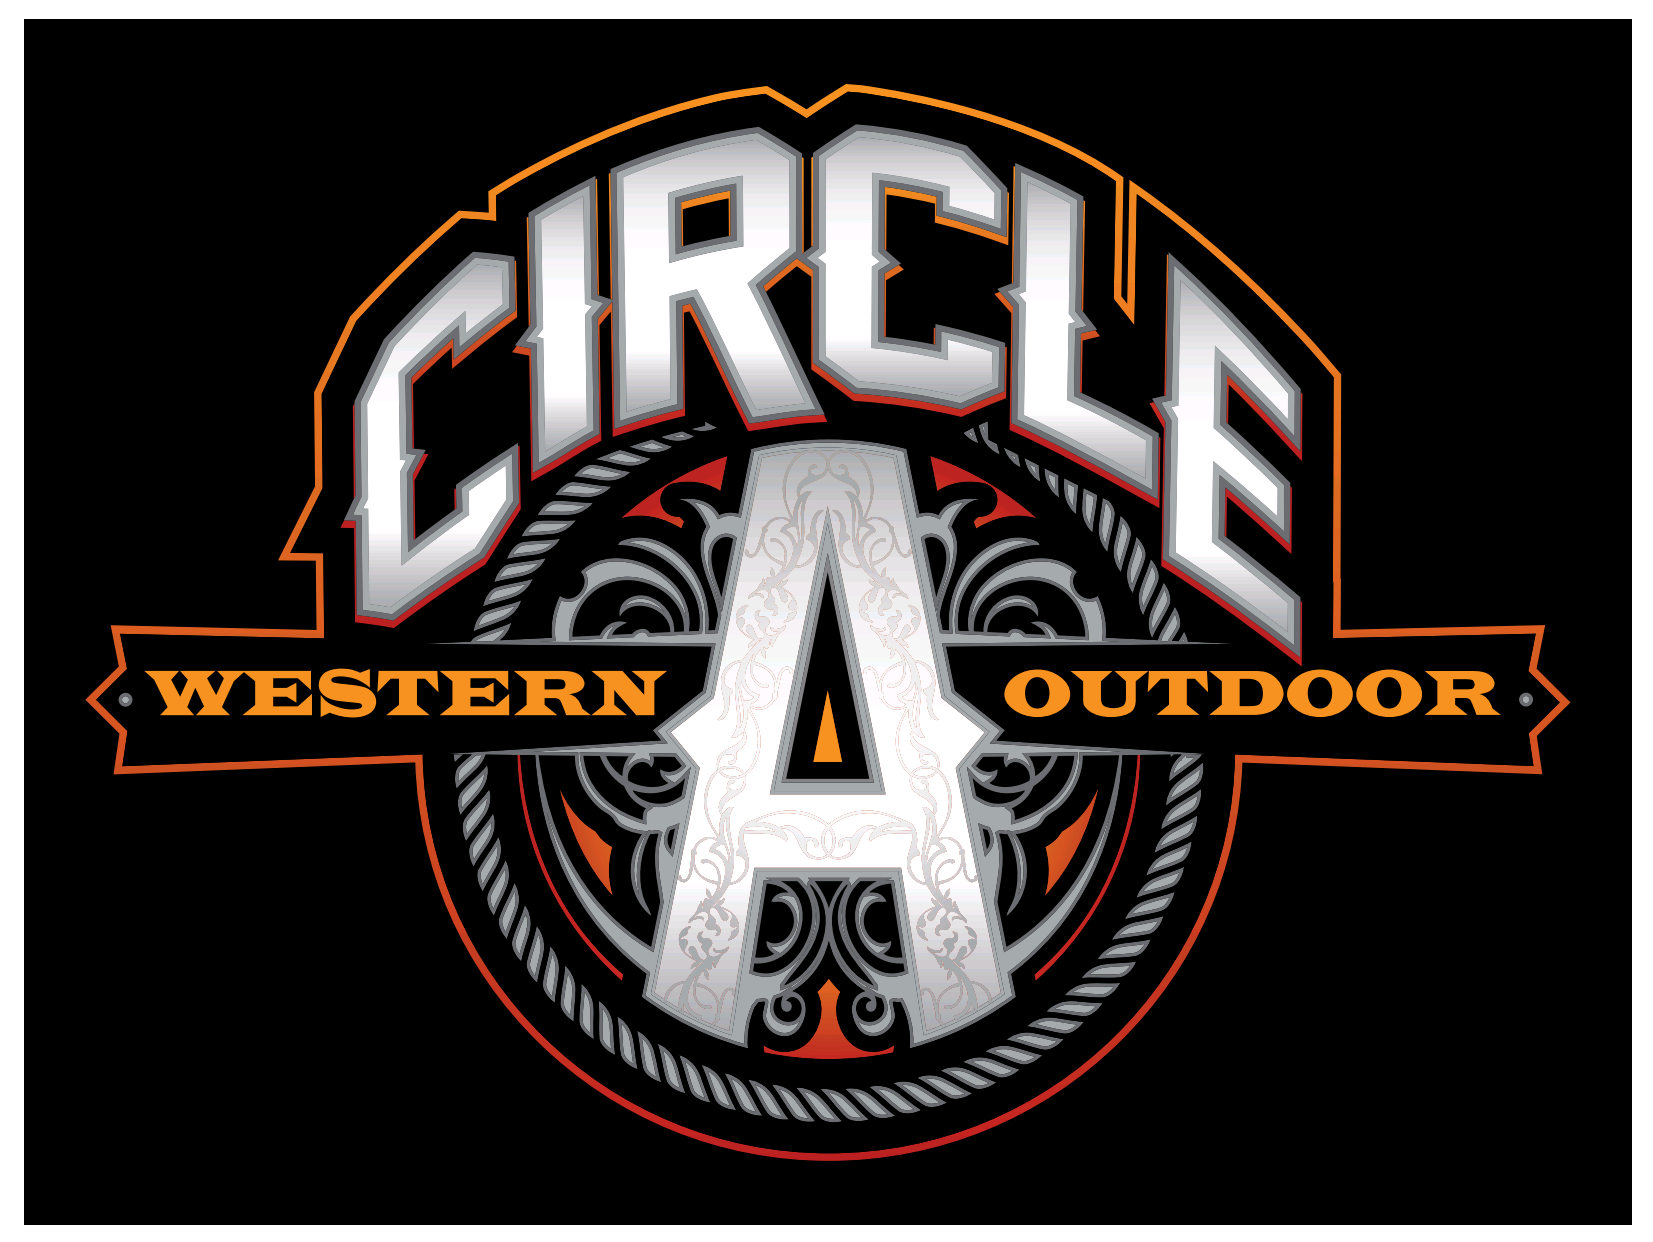 Circle A Western & Outdoor